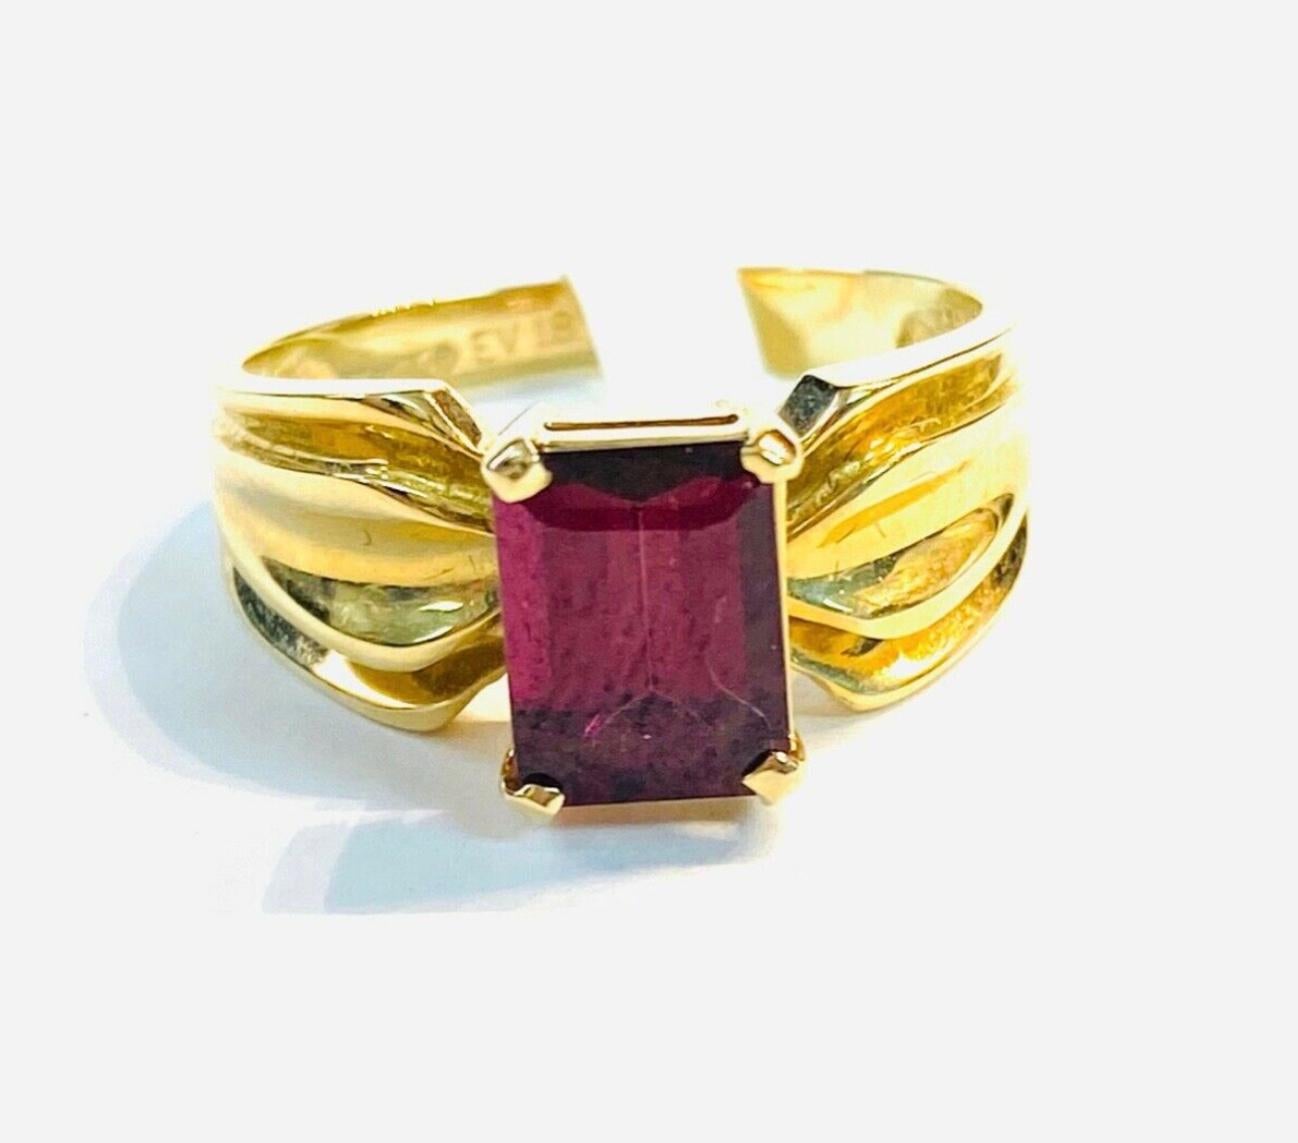 14k yellow gold emerald cut Garnet ring, 4.10 Grams TW. The dimensions of the emerald cut garnet are approximately 7.5 mm x 5 mm. Approximately 1.5 carats. Marked 14K. Approximate size 6.5.